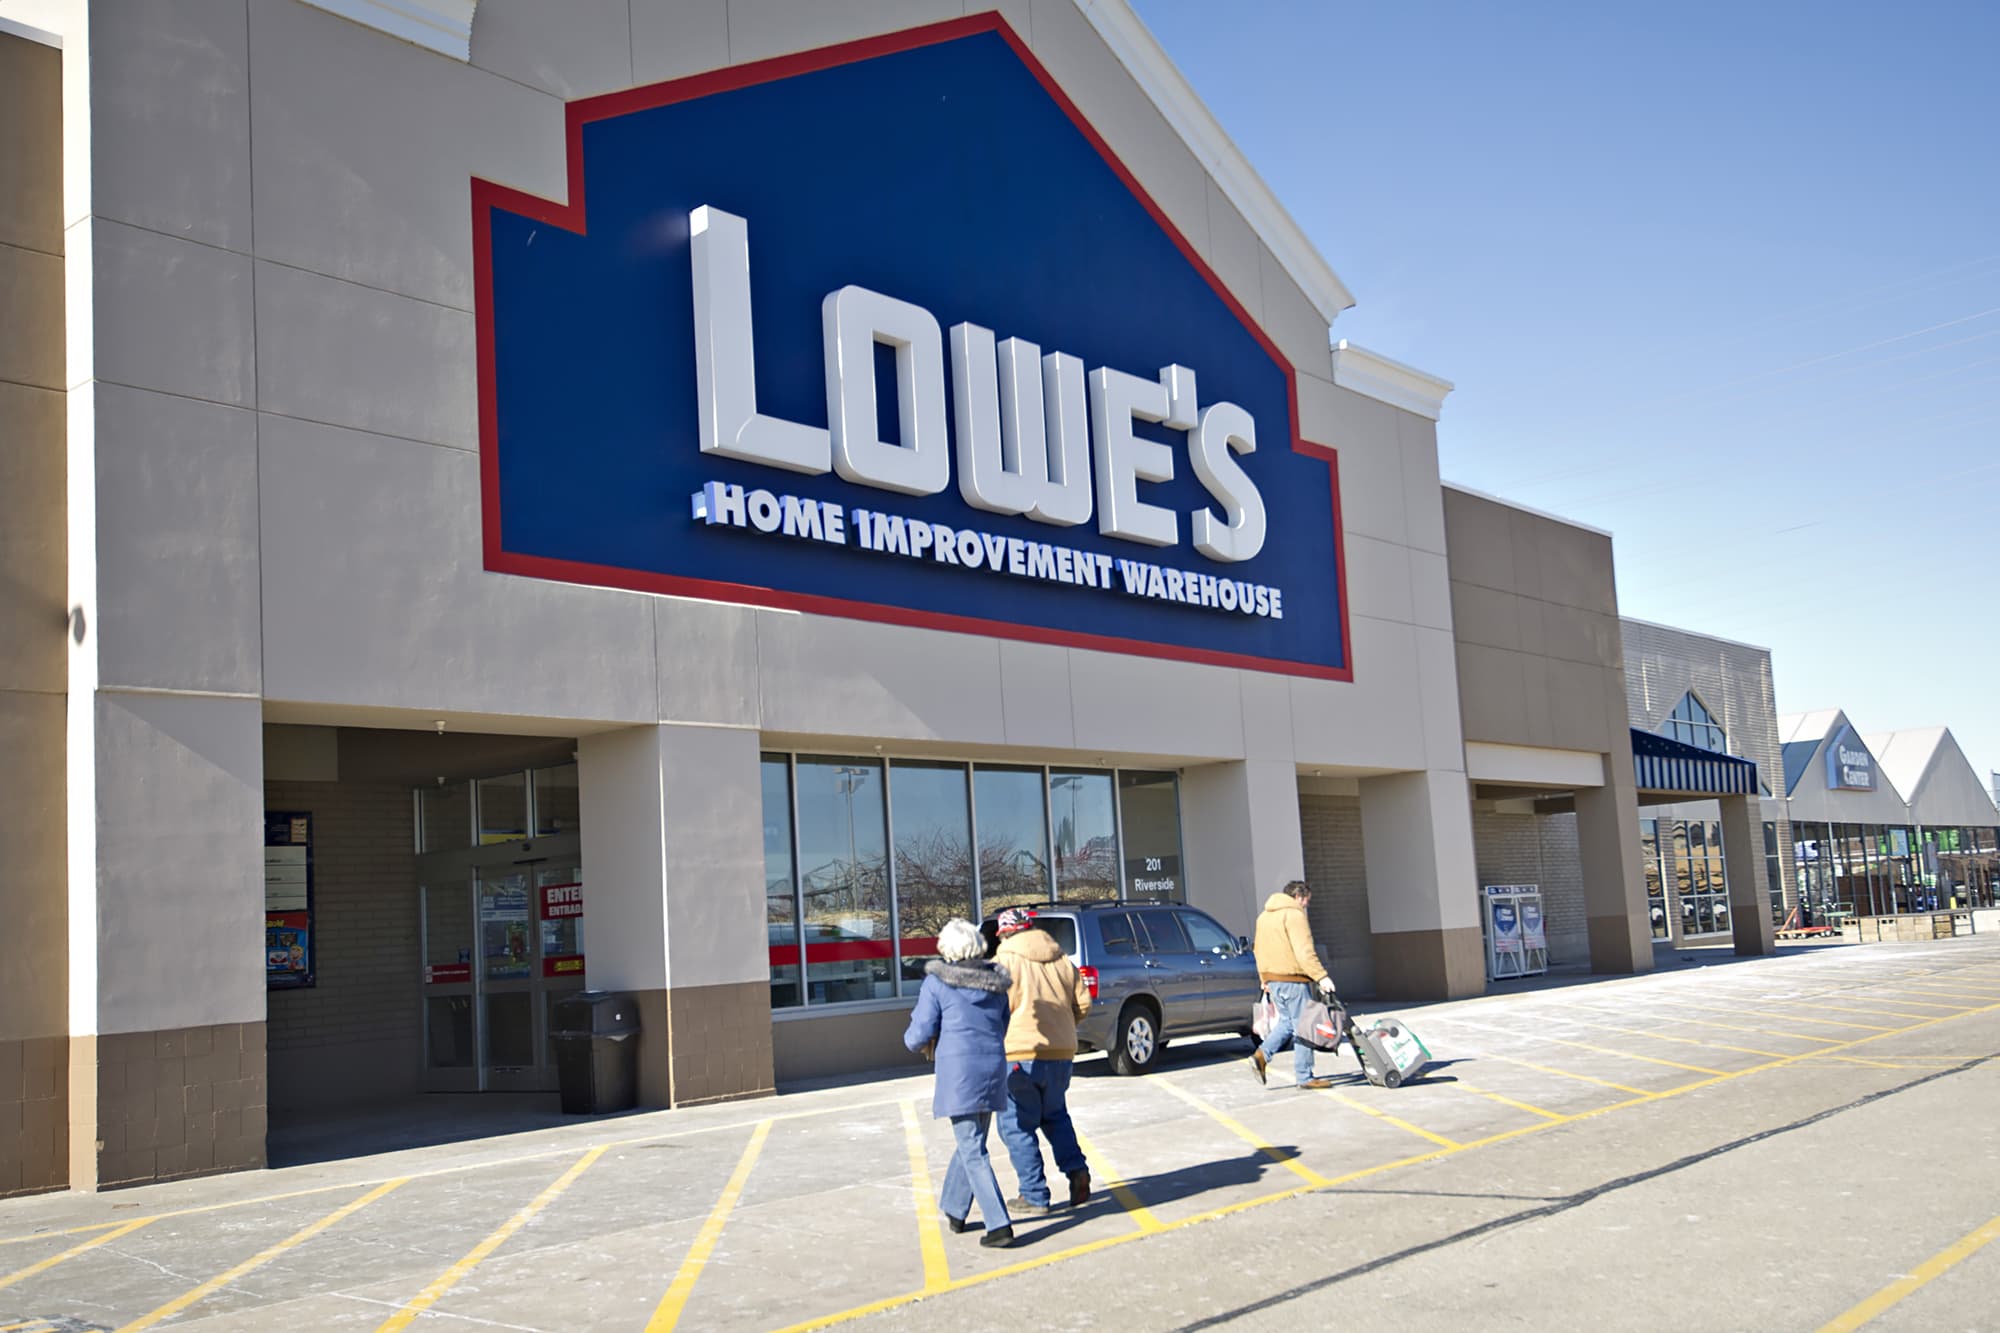 the closest lowe's from here